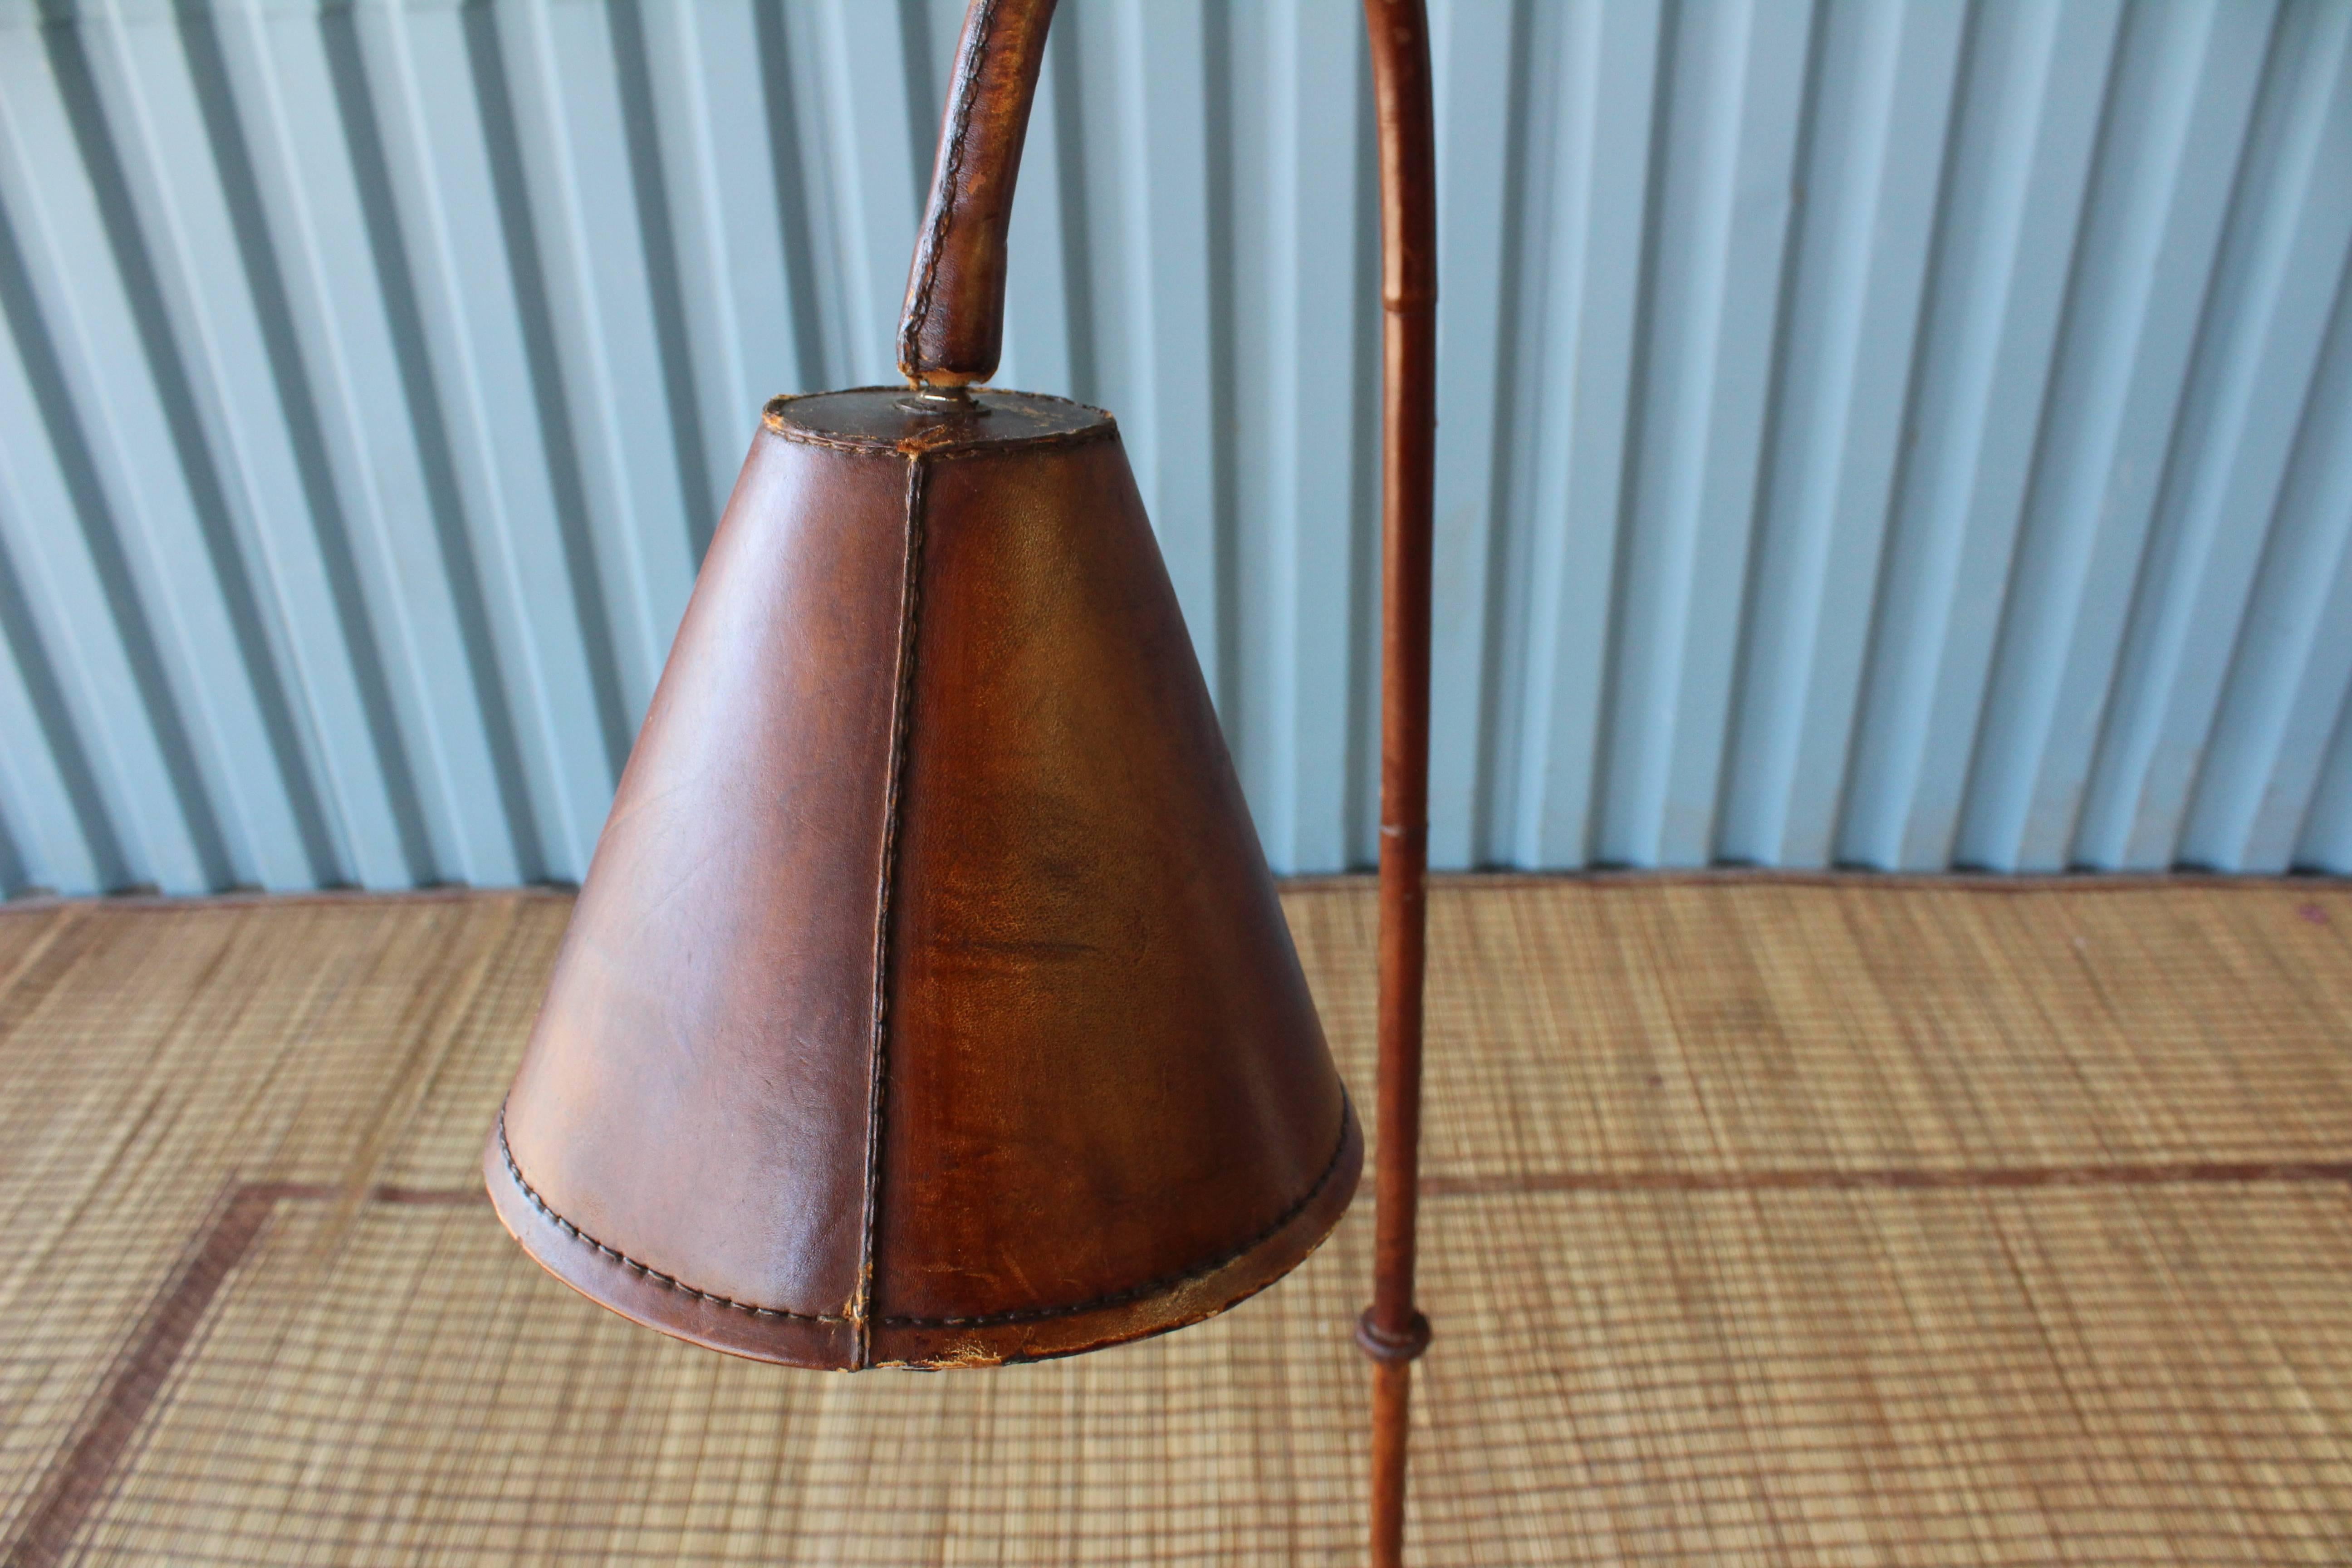 A brown leather-wrapped floor lamp by Valenti, Spain, 1950s. Leather shows age appropriate wear and patina. Newly rewired for U.S standards.